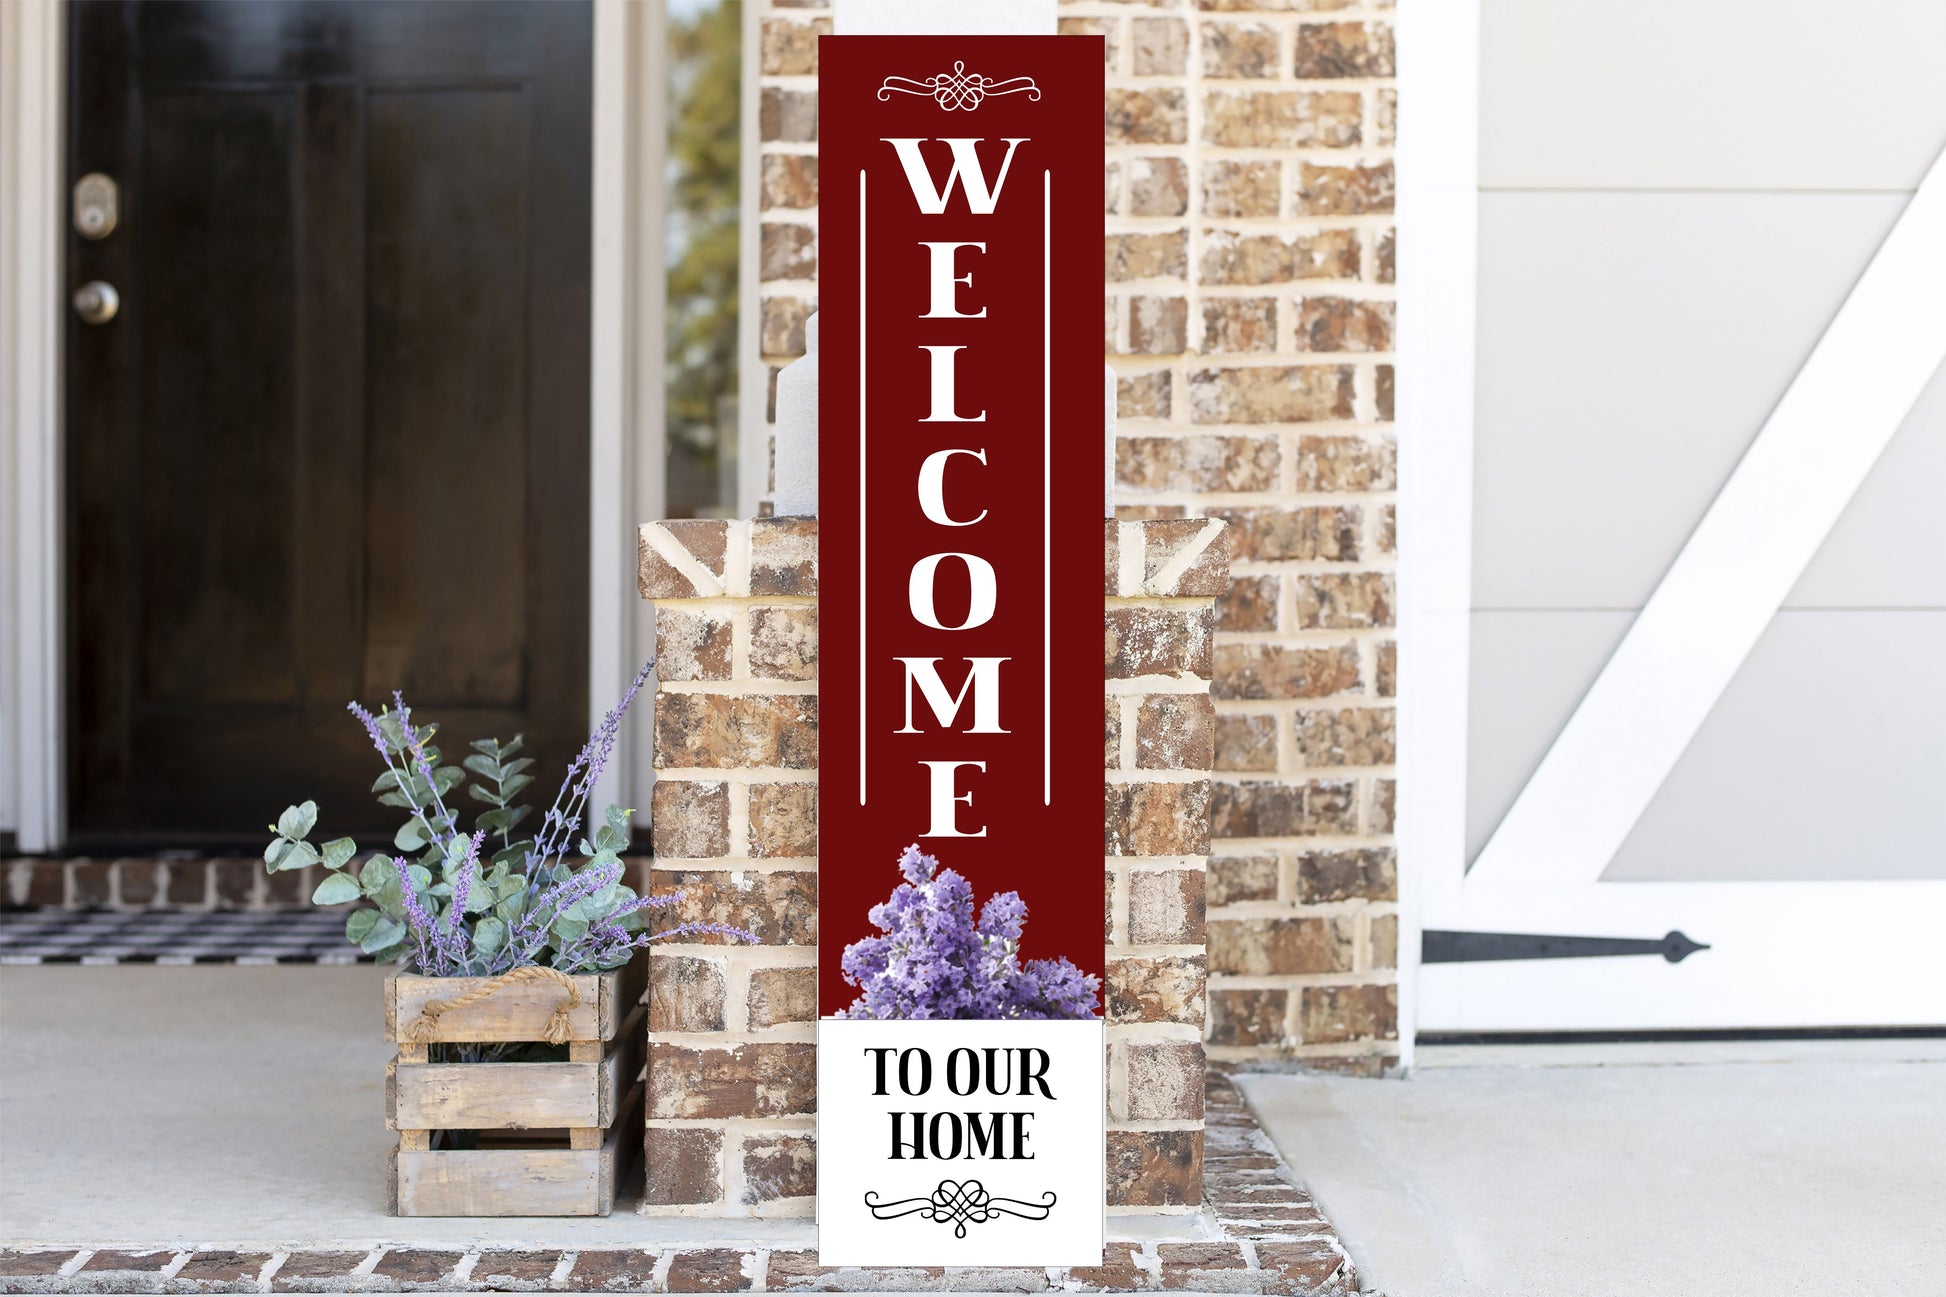 Welcome to our home design